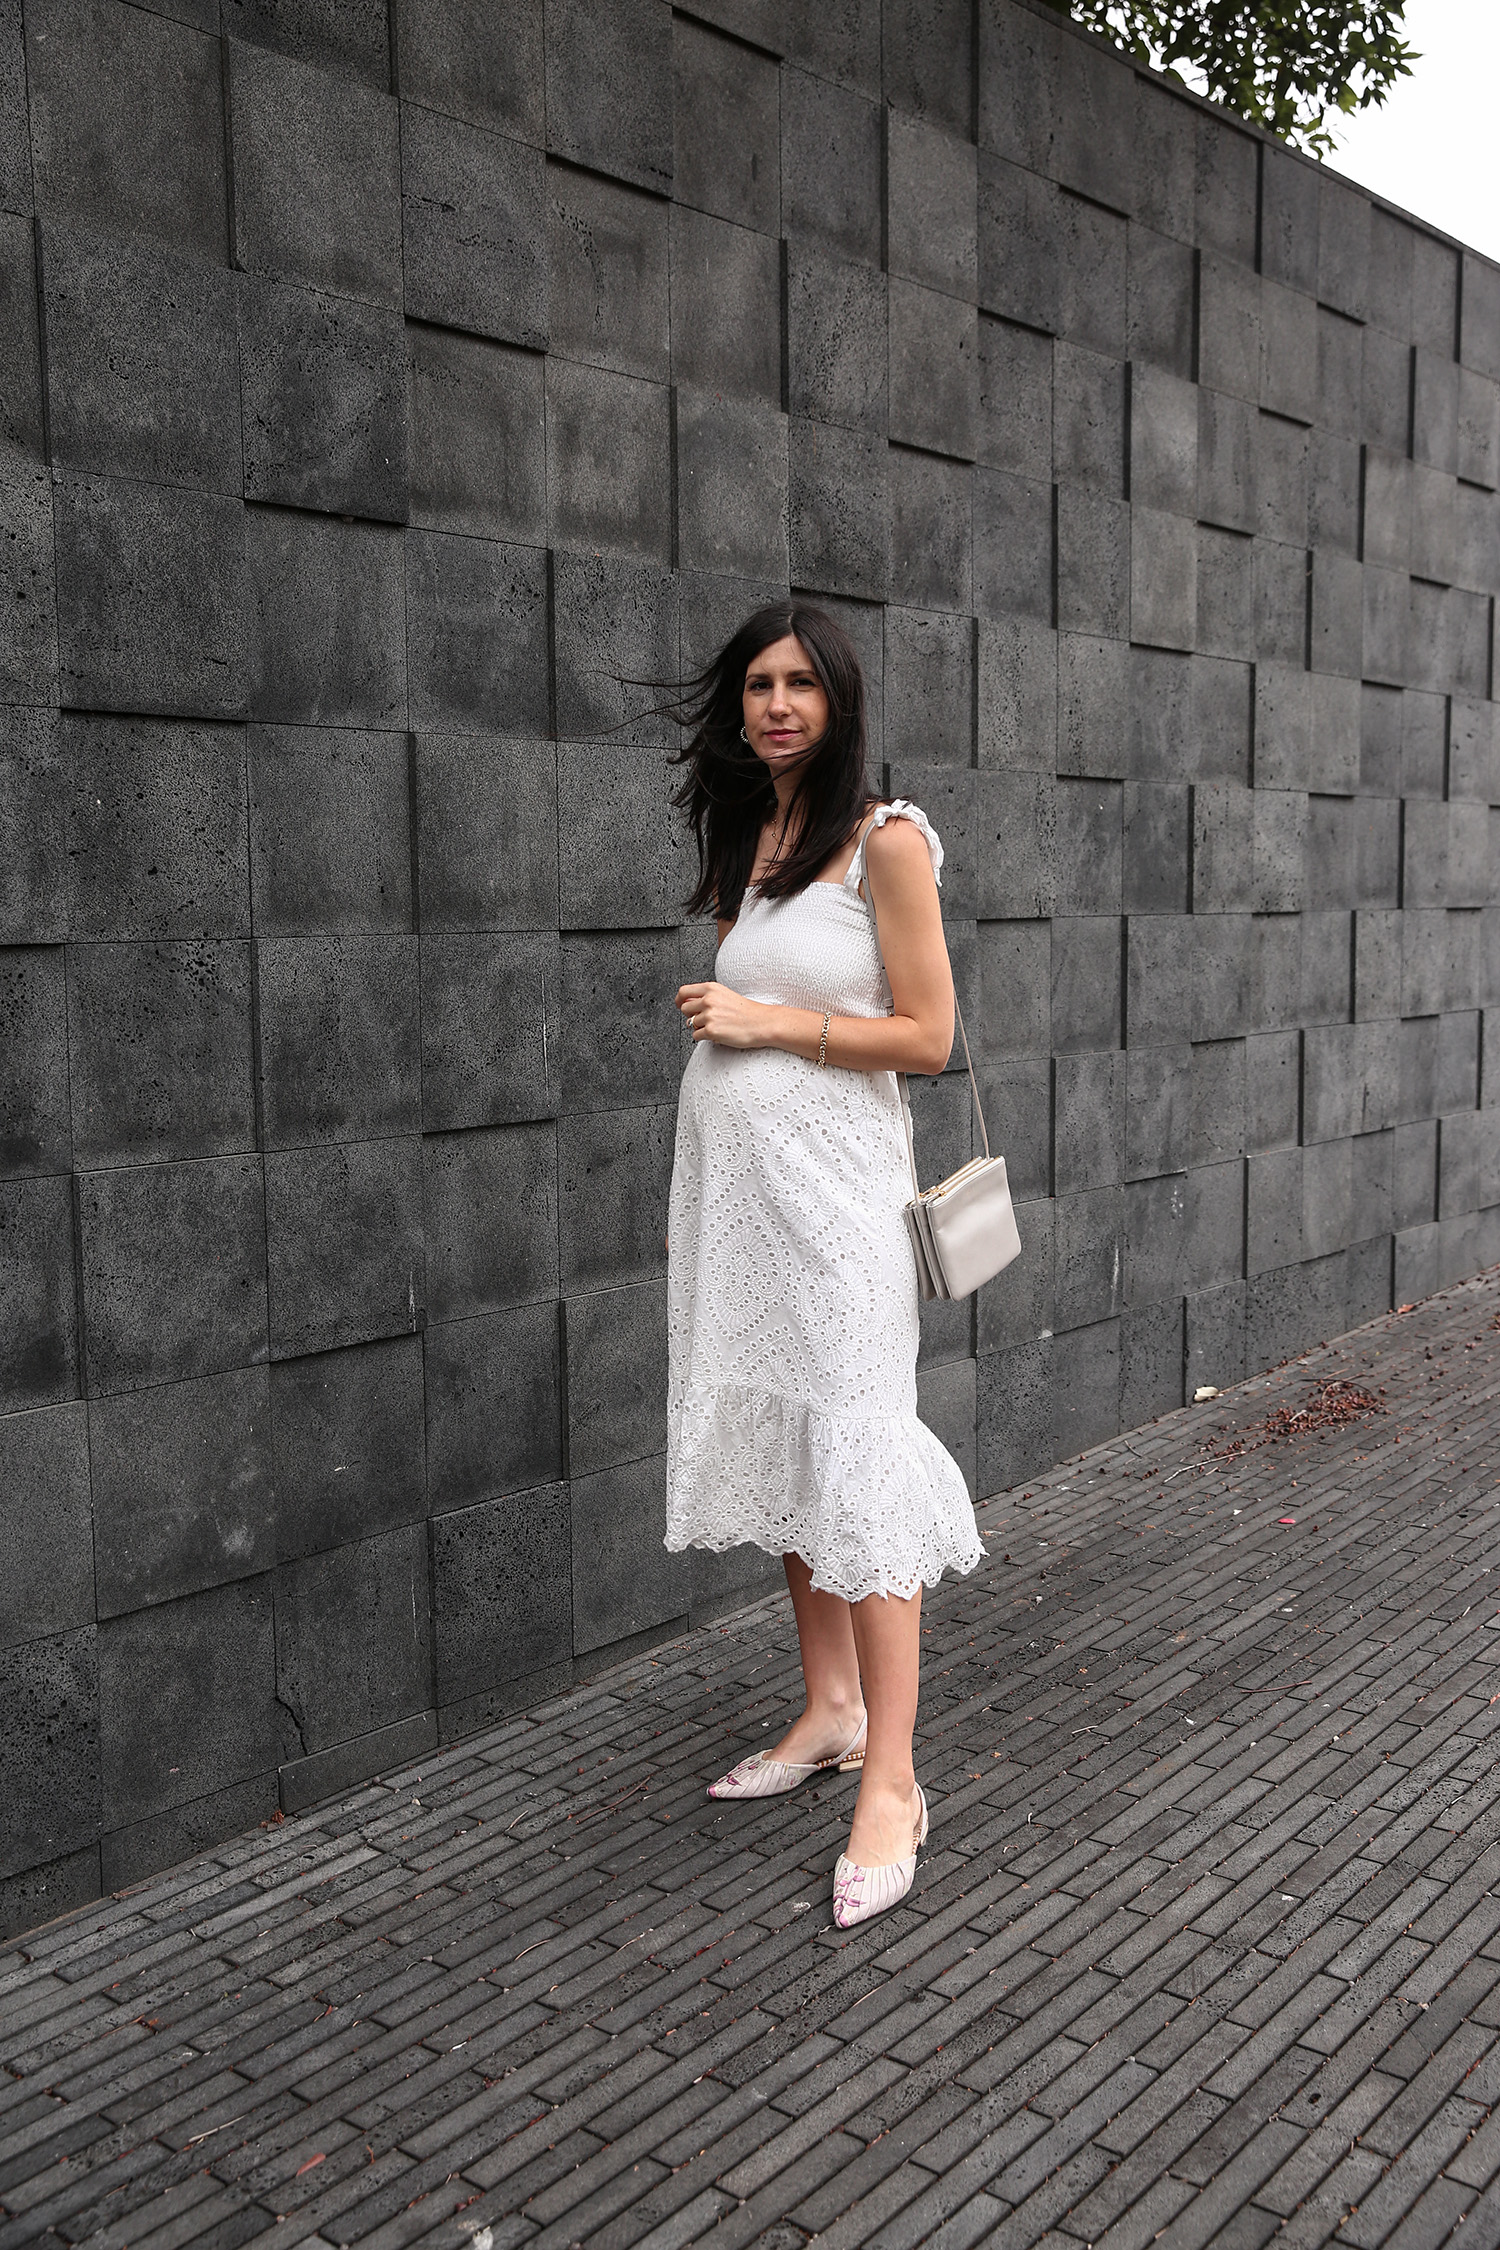 Jamie Lee of Mademoiselle wearing a Farrow broderie anglaise dress and Zimmermann flats